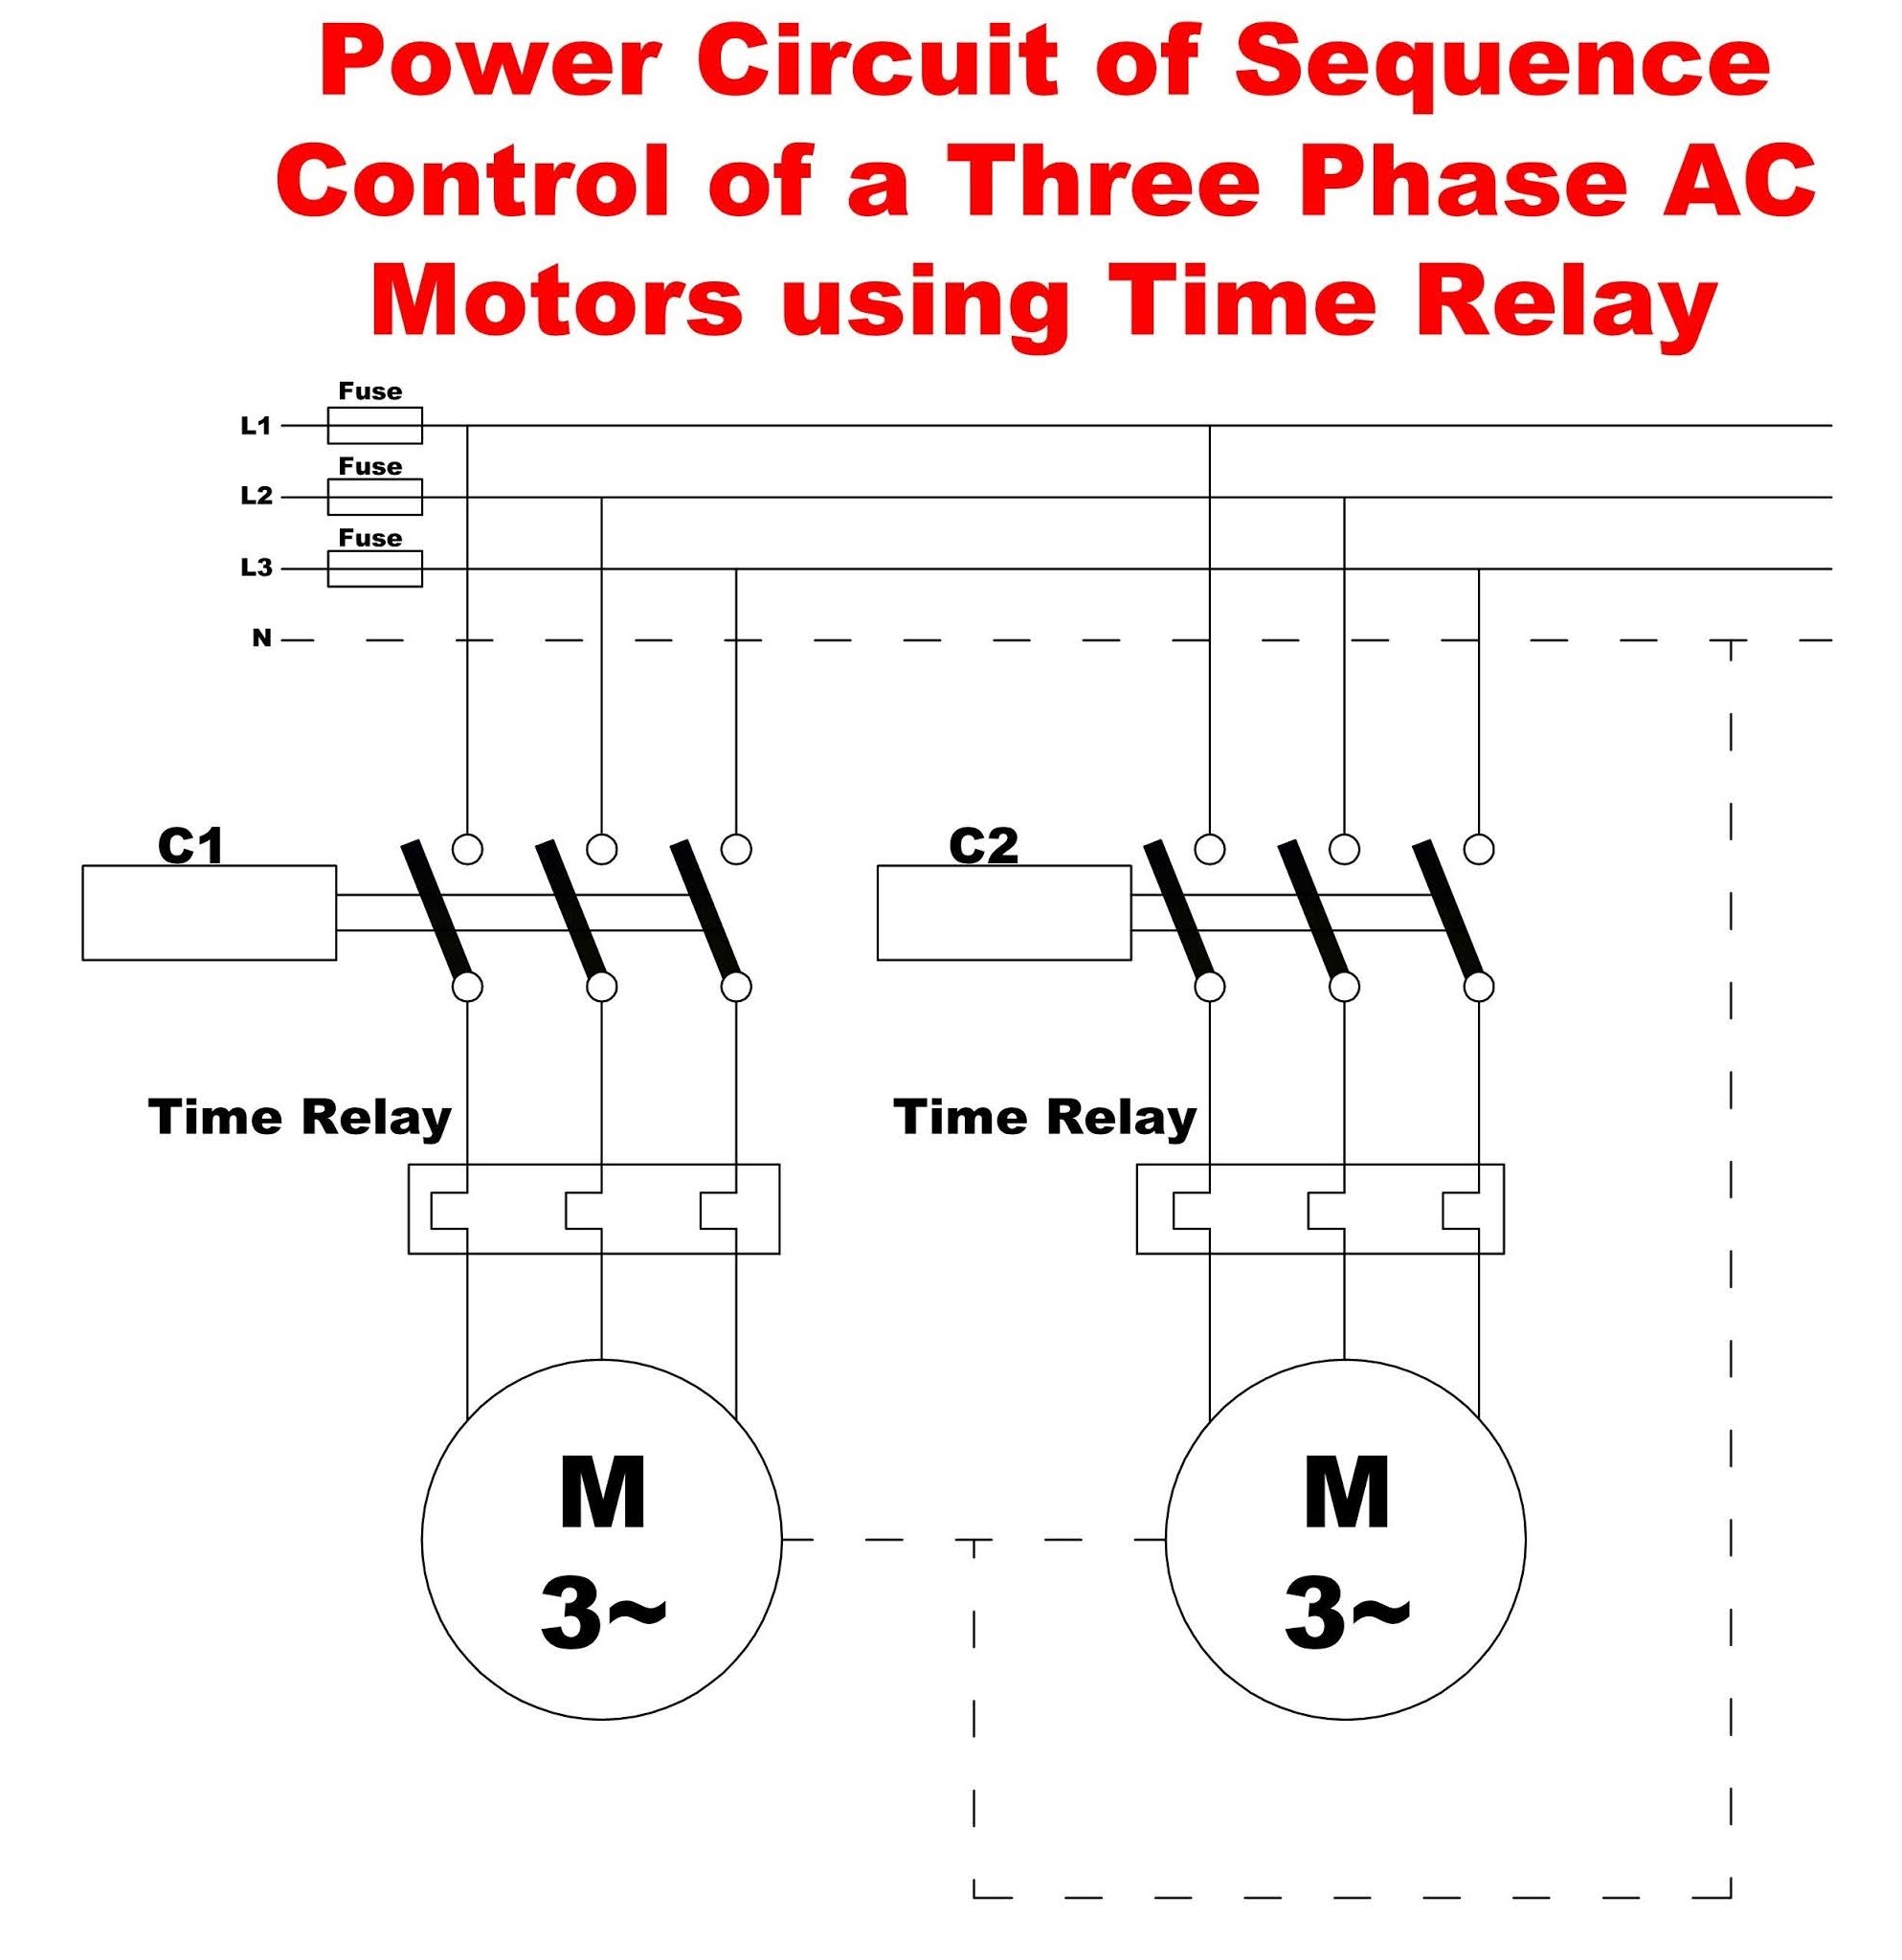 Sequence Control of a Three Phase AC Motors using Time Relay